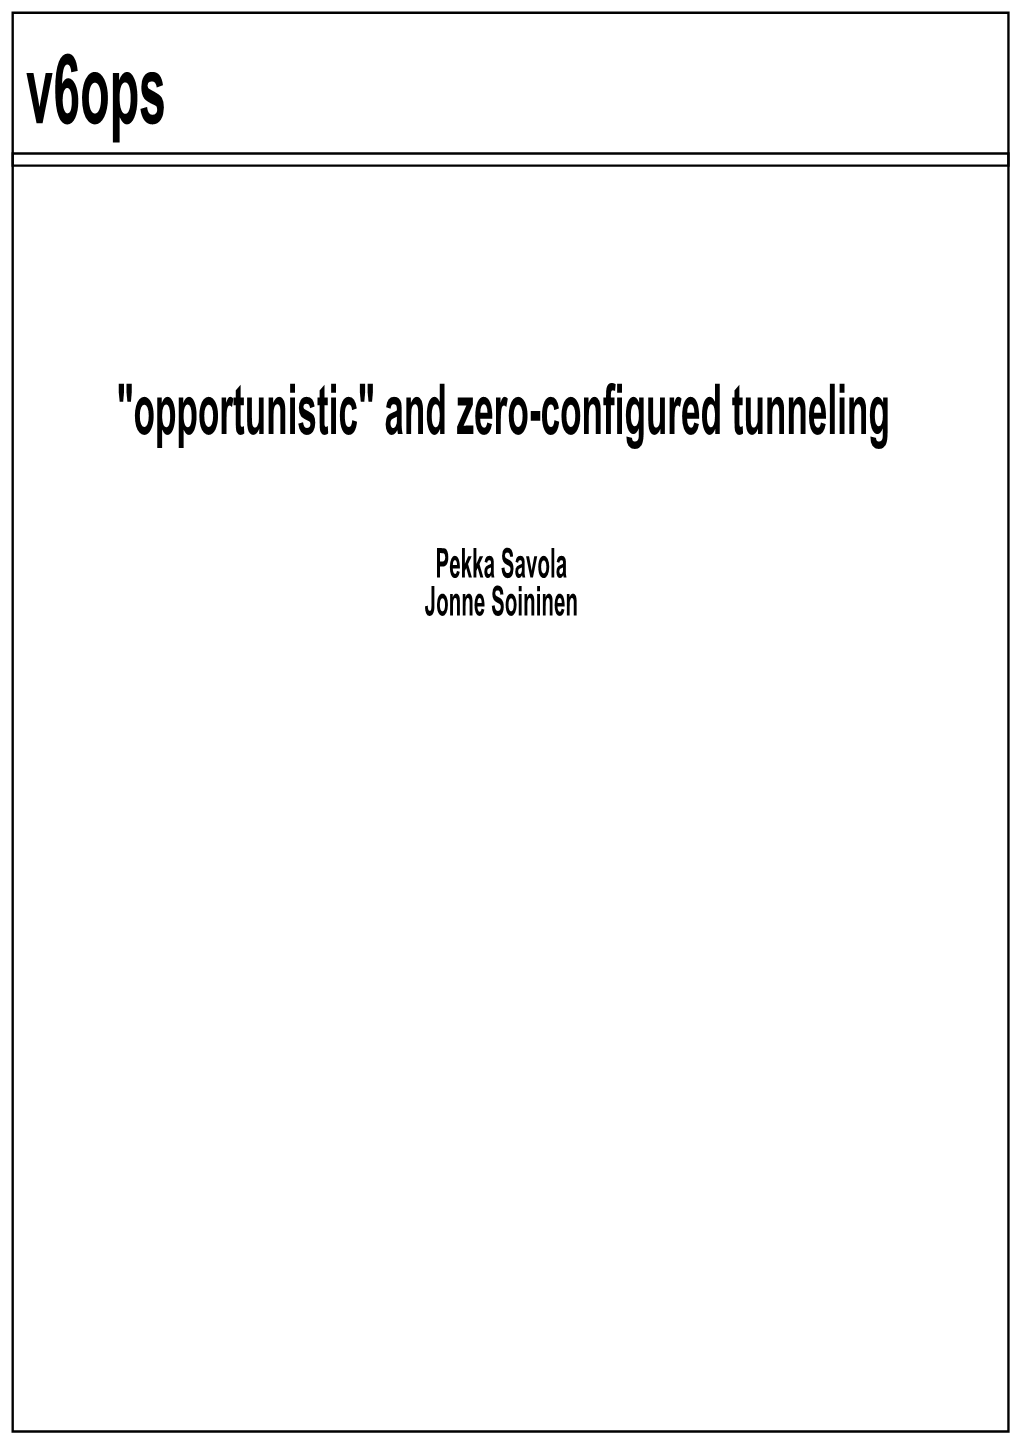 "Opportunistic" and Zero-Configured Tunneling